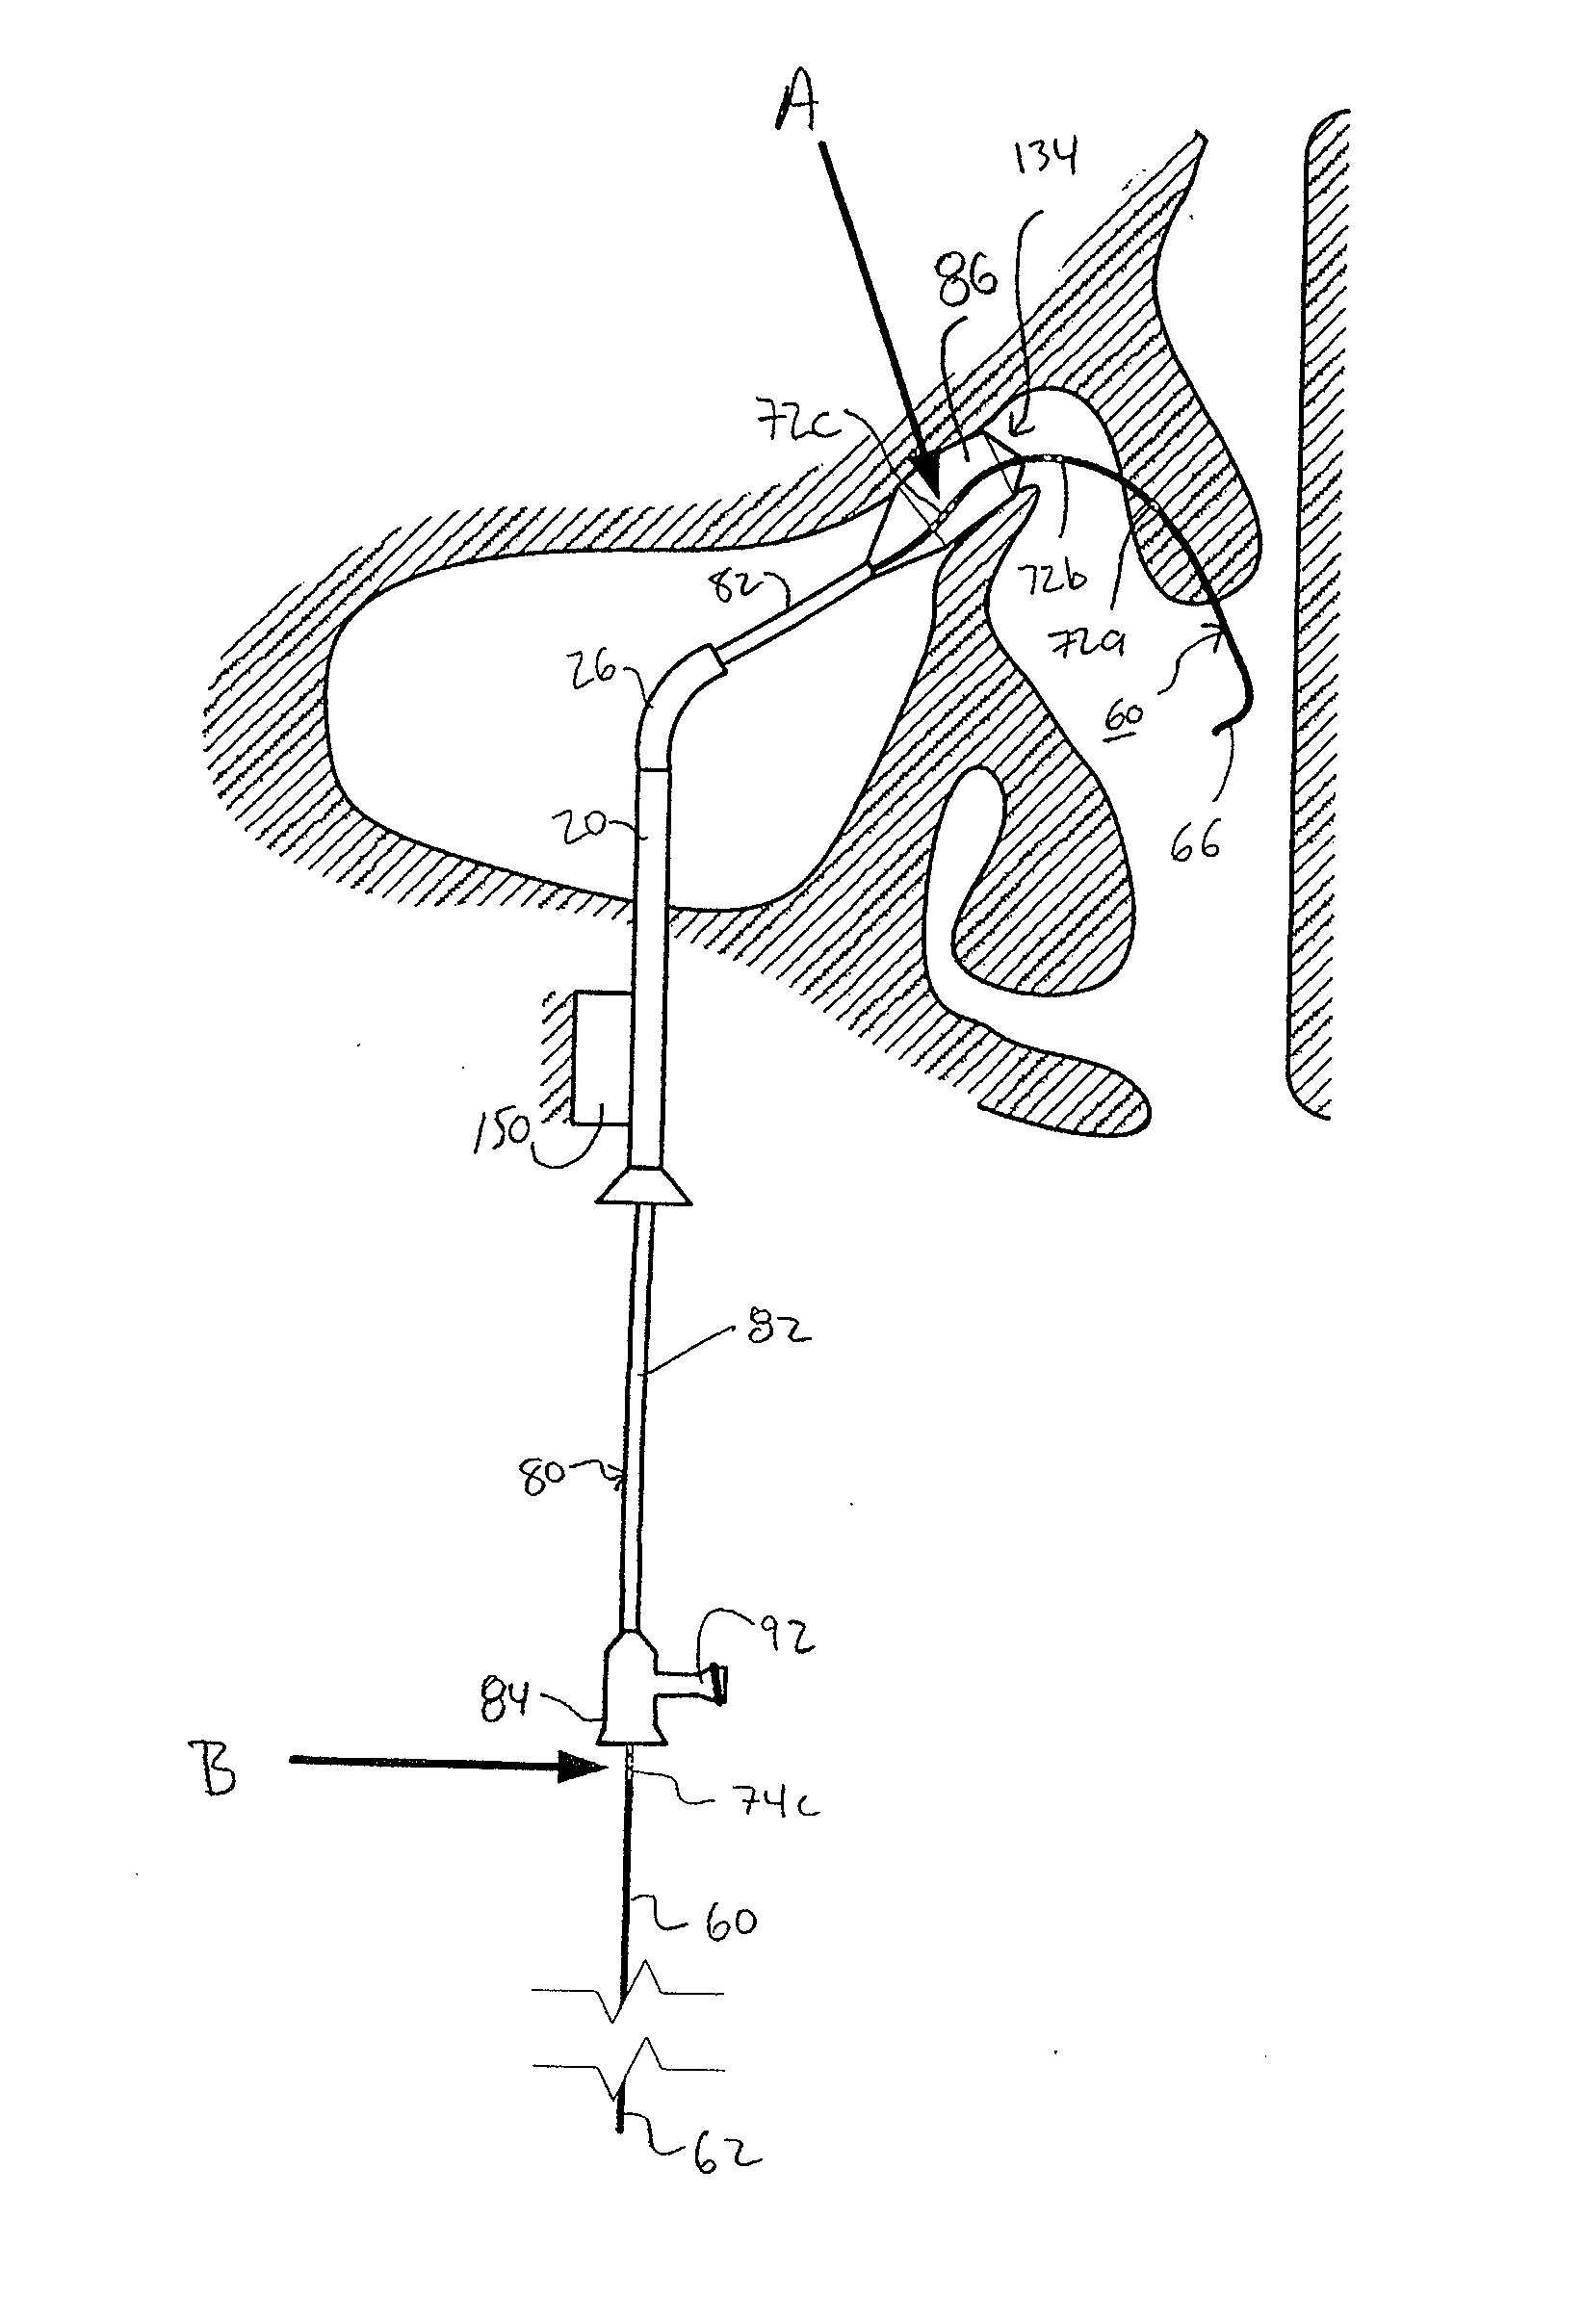 Apparatus and method for treatment of sinusitis